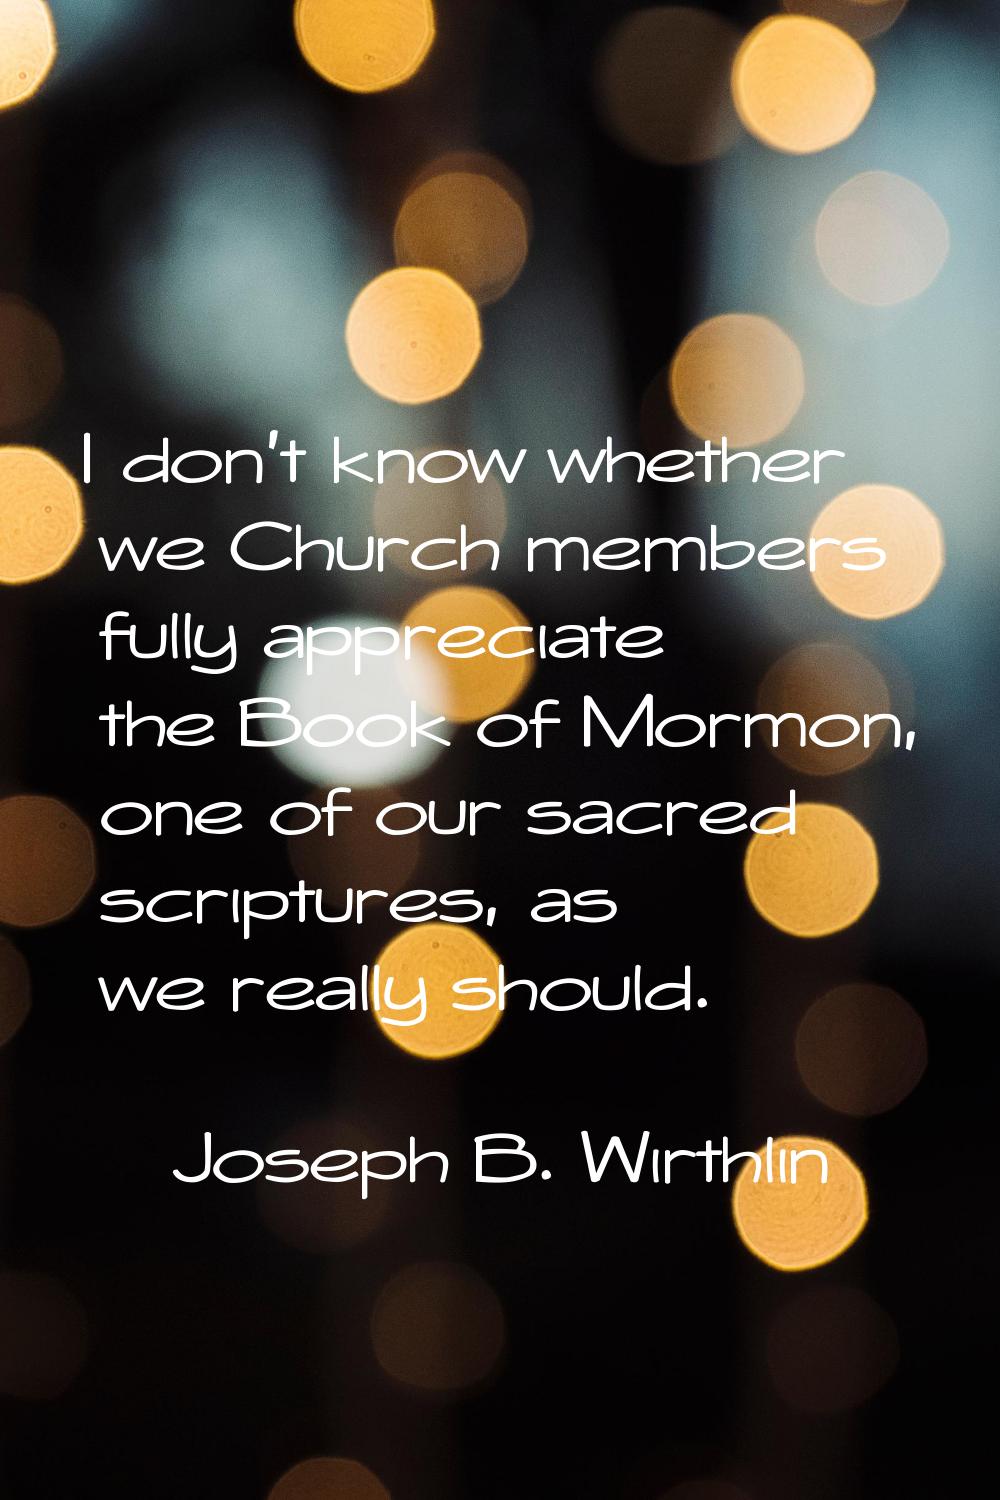 I don't know whether we Church members fully appreciate the Book of Mormon, one of our sacred scrip